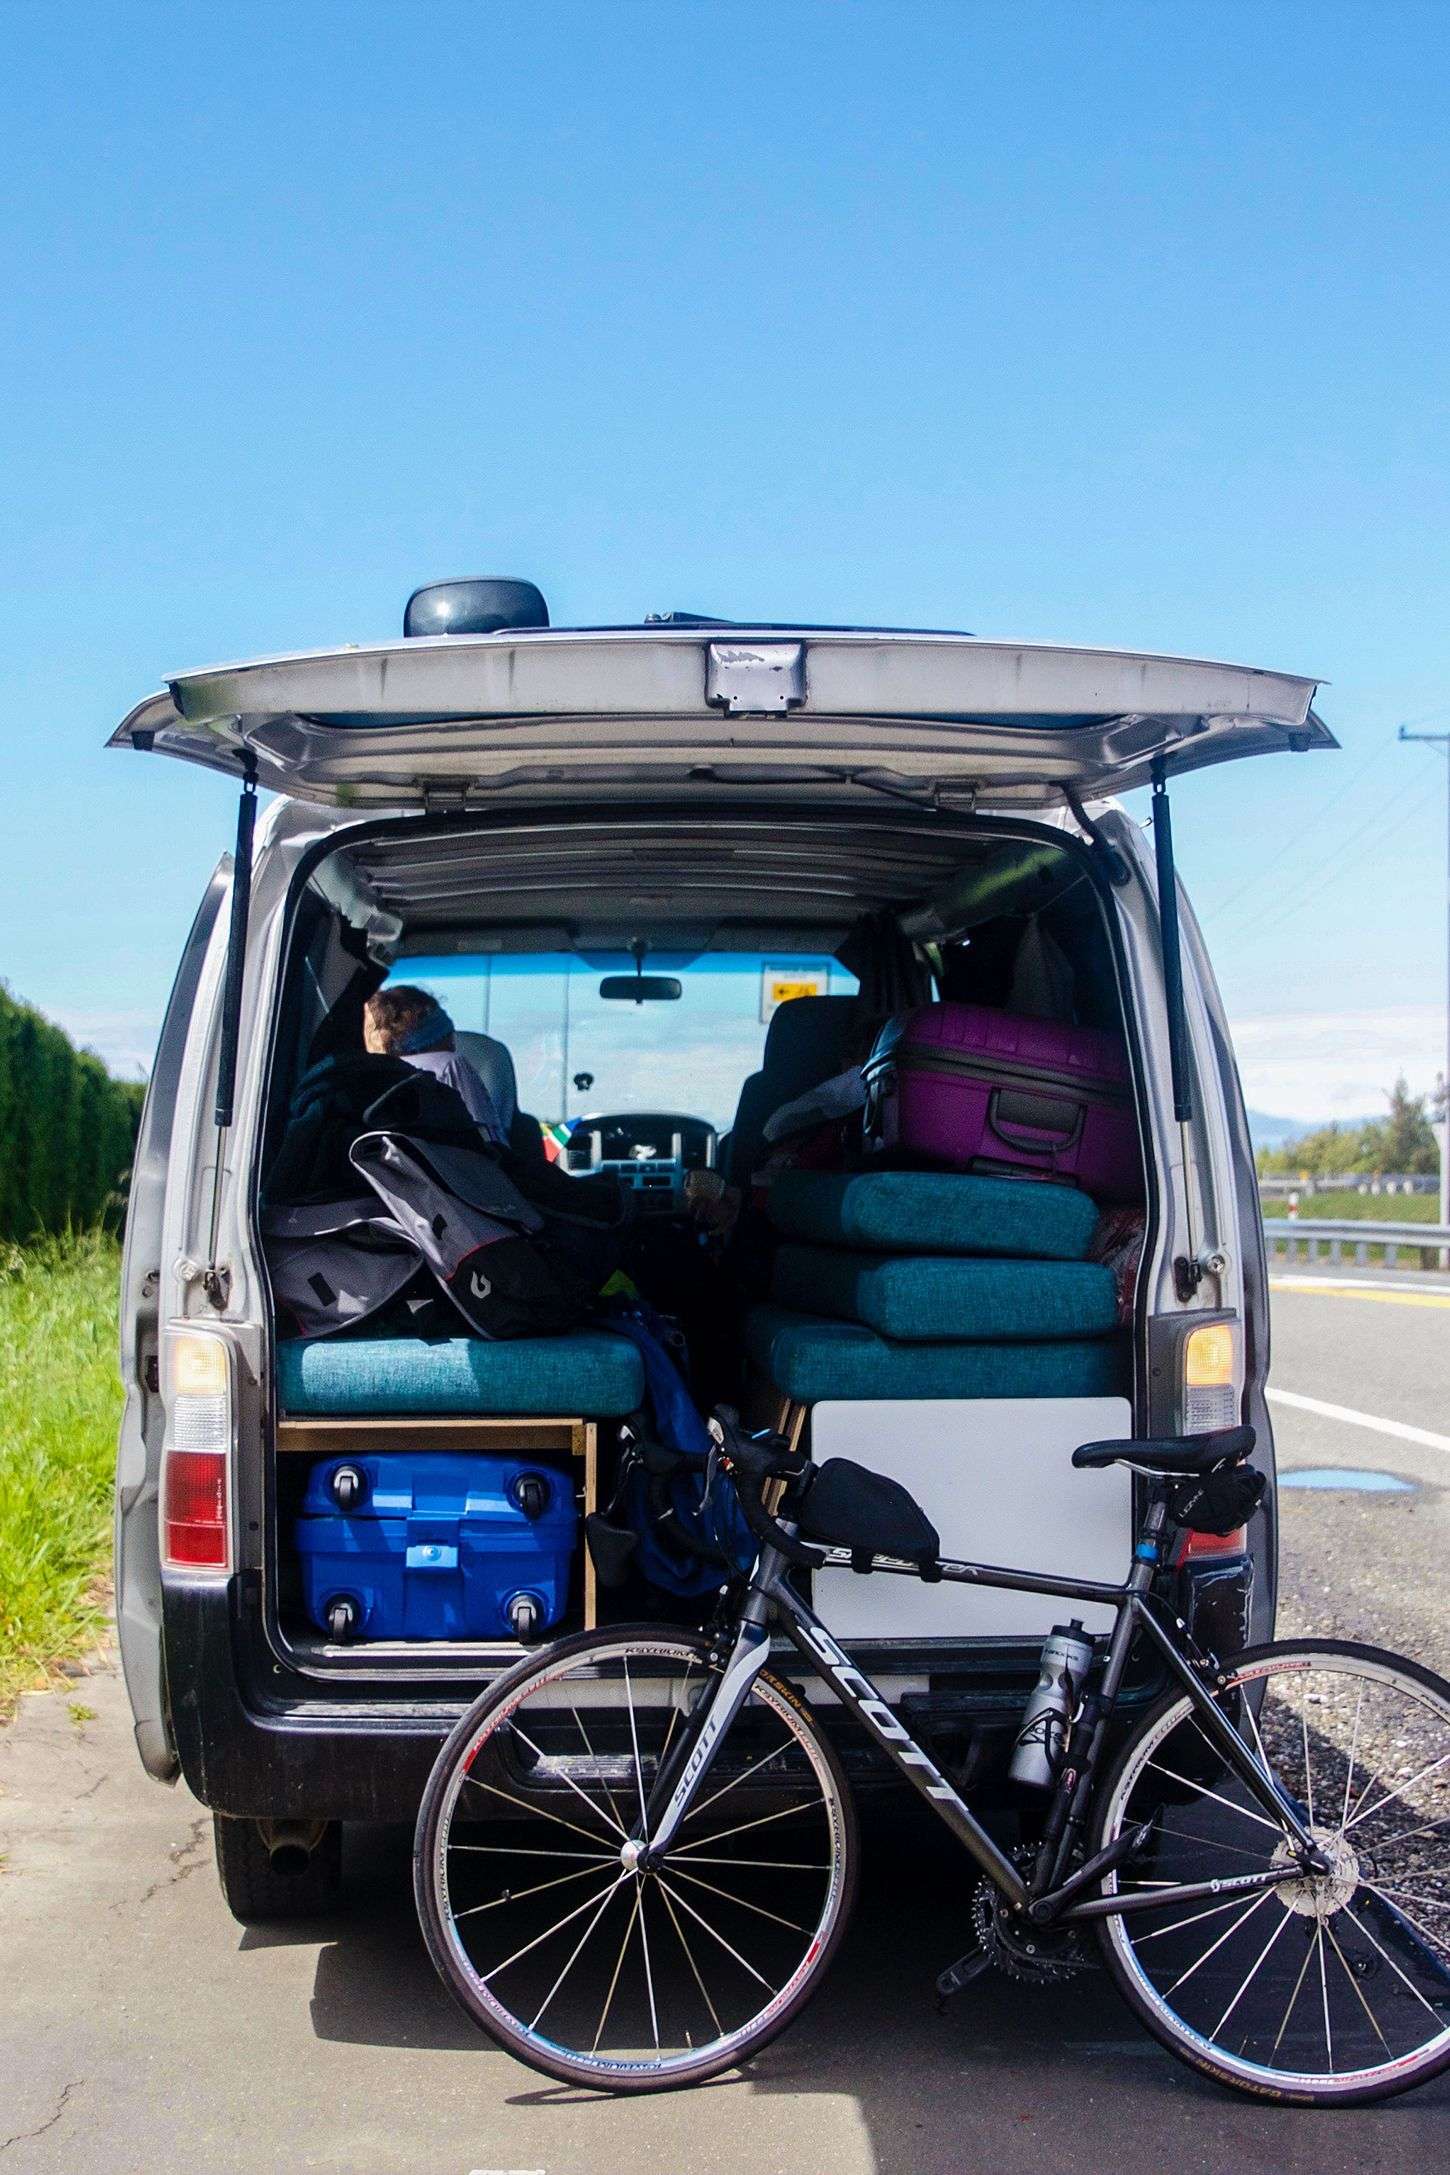 Going Car Camping? Check Out the 20 Best Tips and Tricks ...